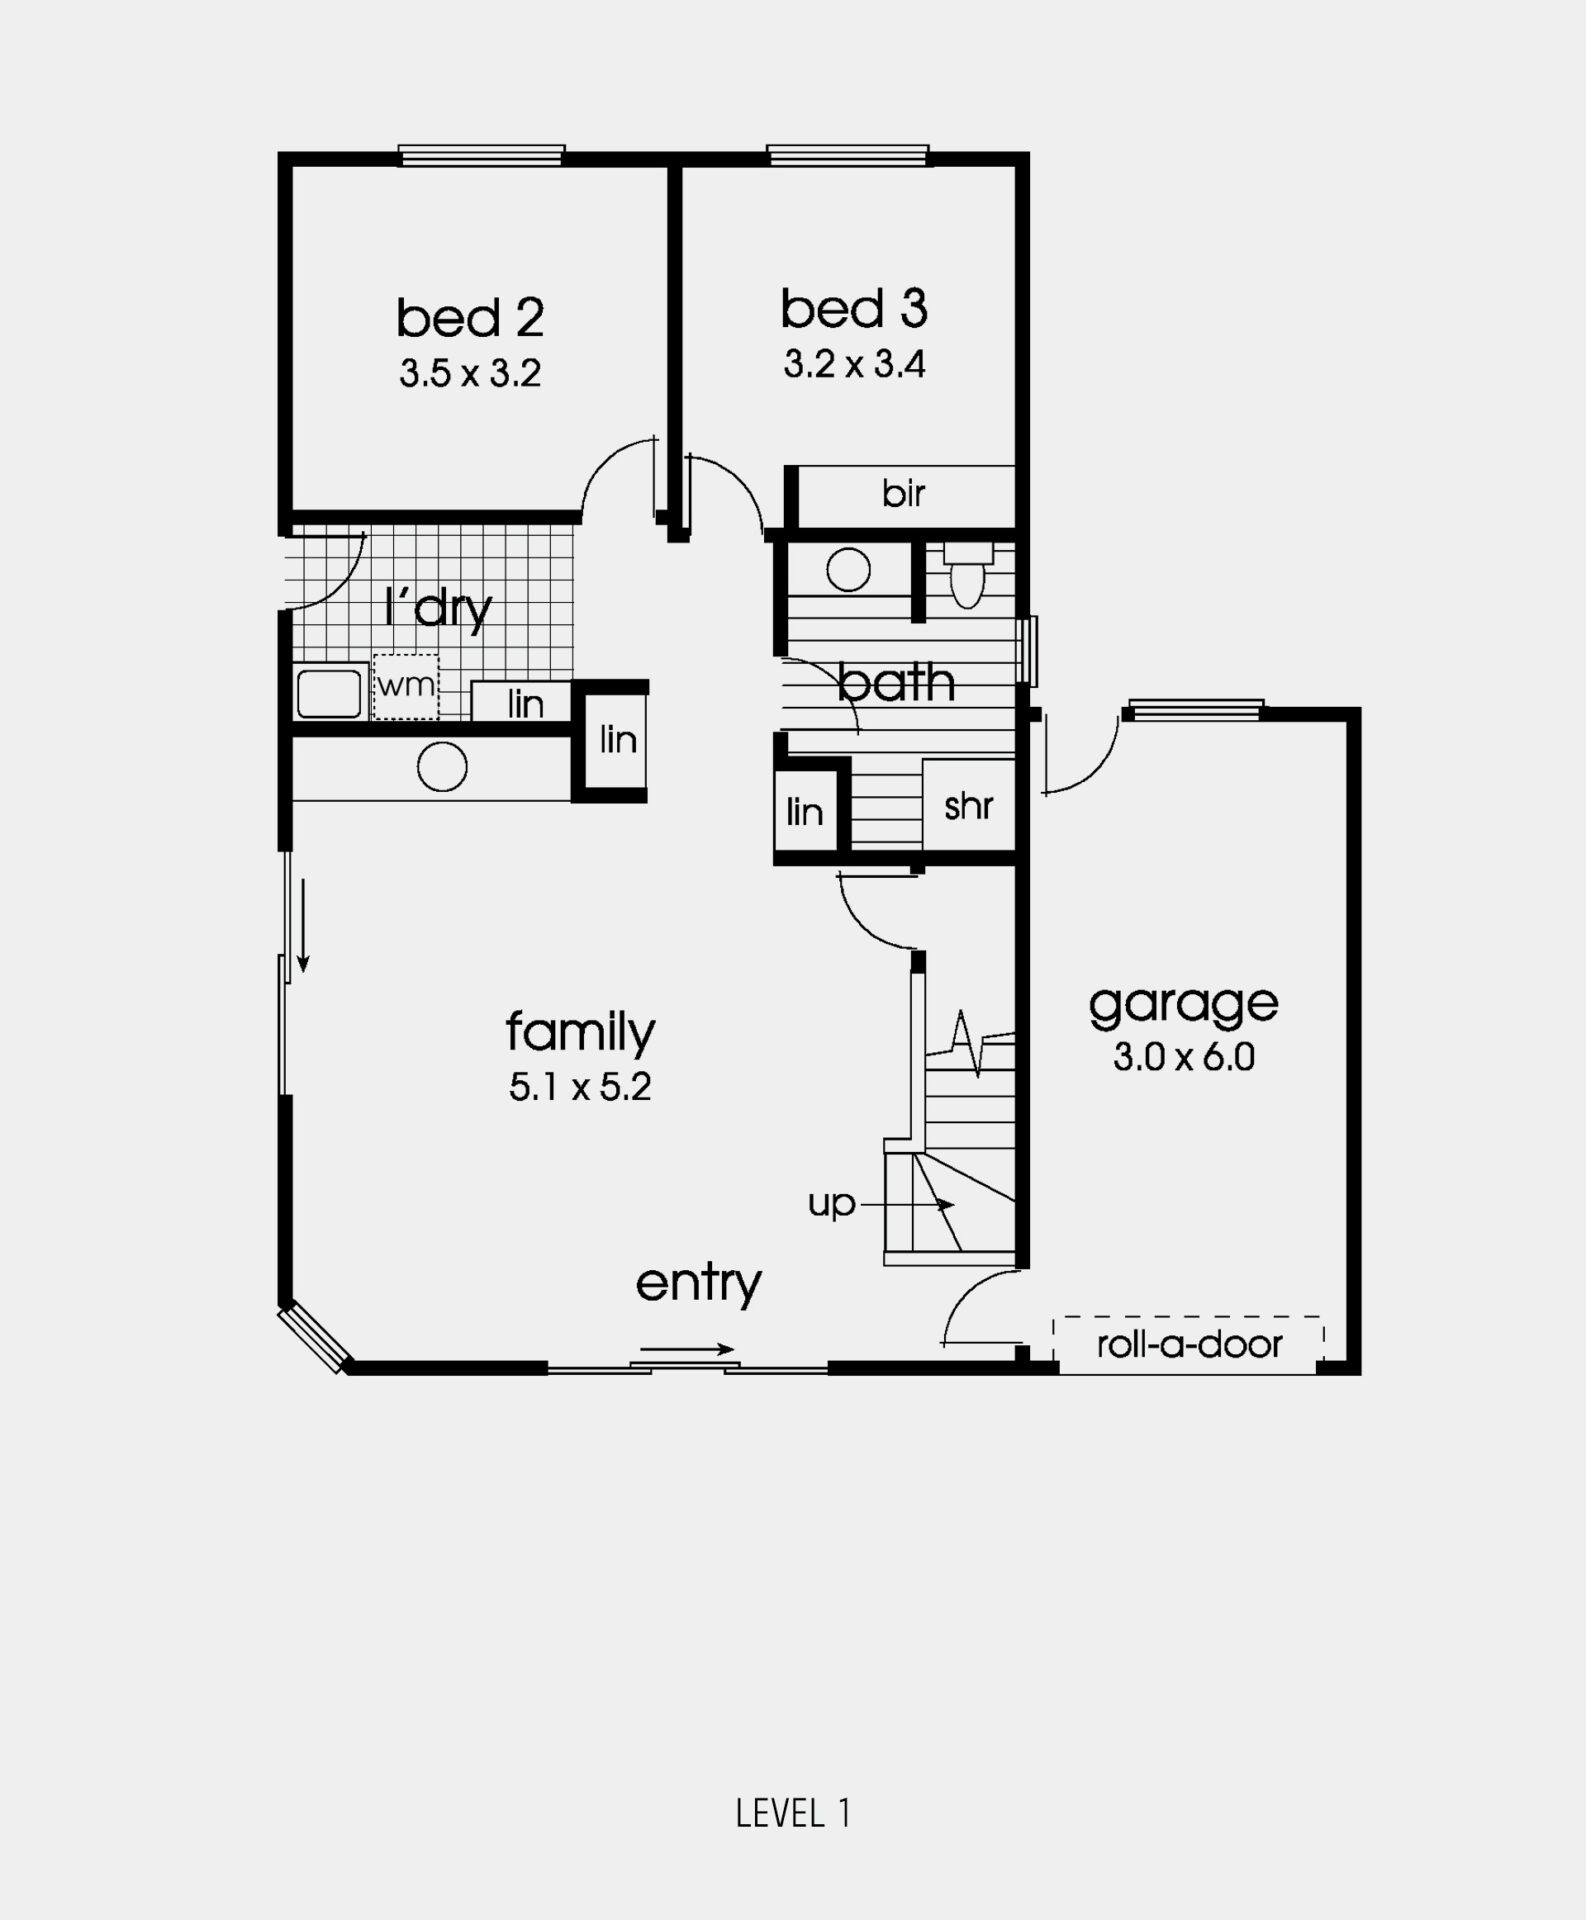 Image of the marion floor plan